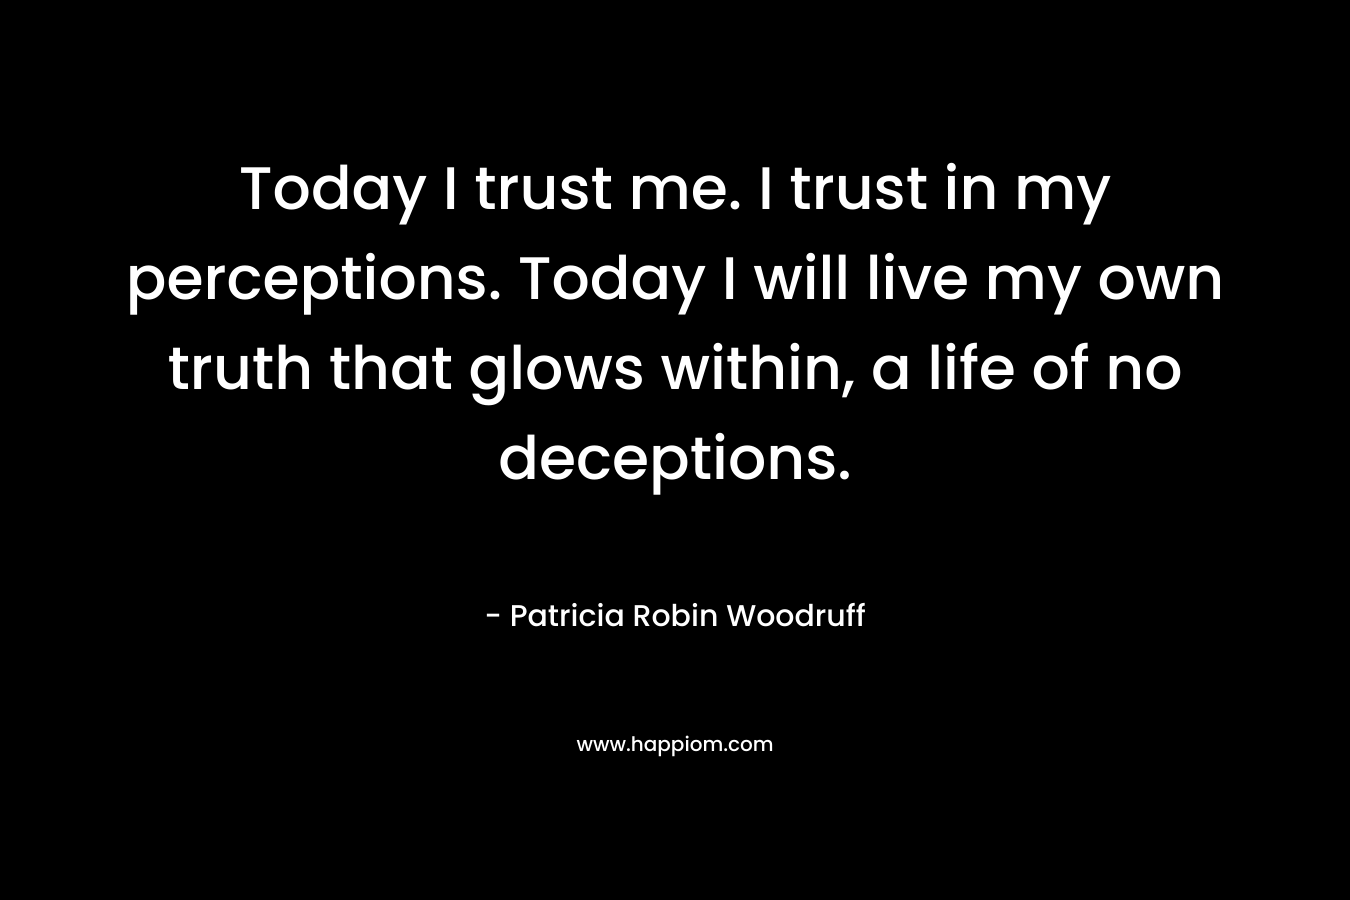 Today I trust me. I trust in my perceptions. Today I will live my own truth that glows within, a life of no deceptions. – Patricia Robin Woodruff